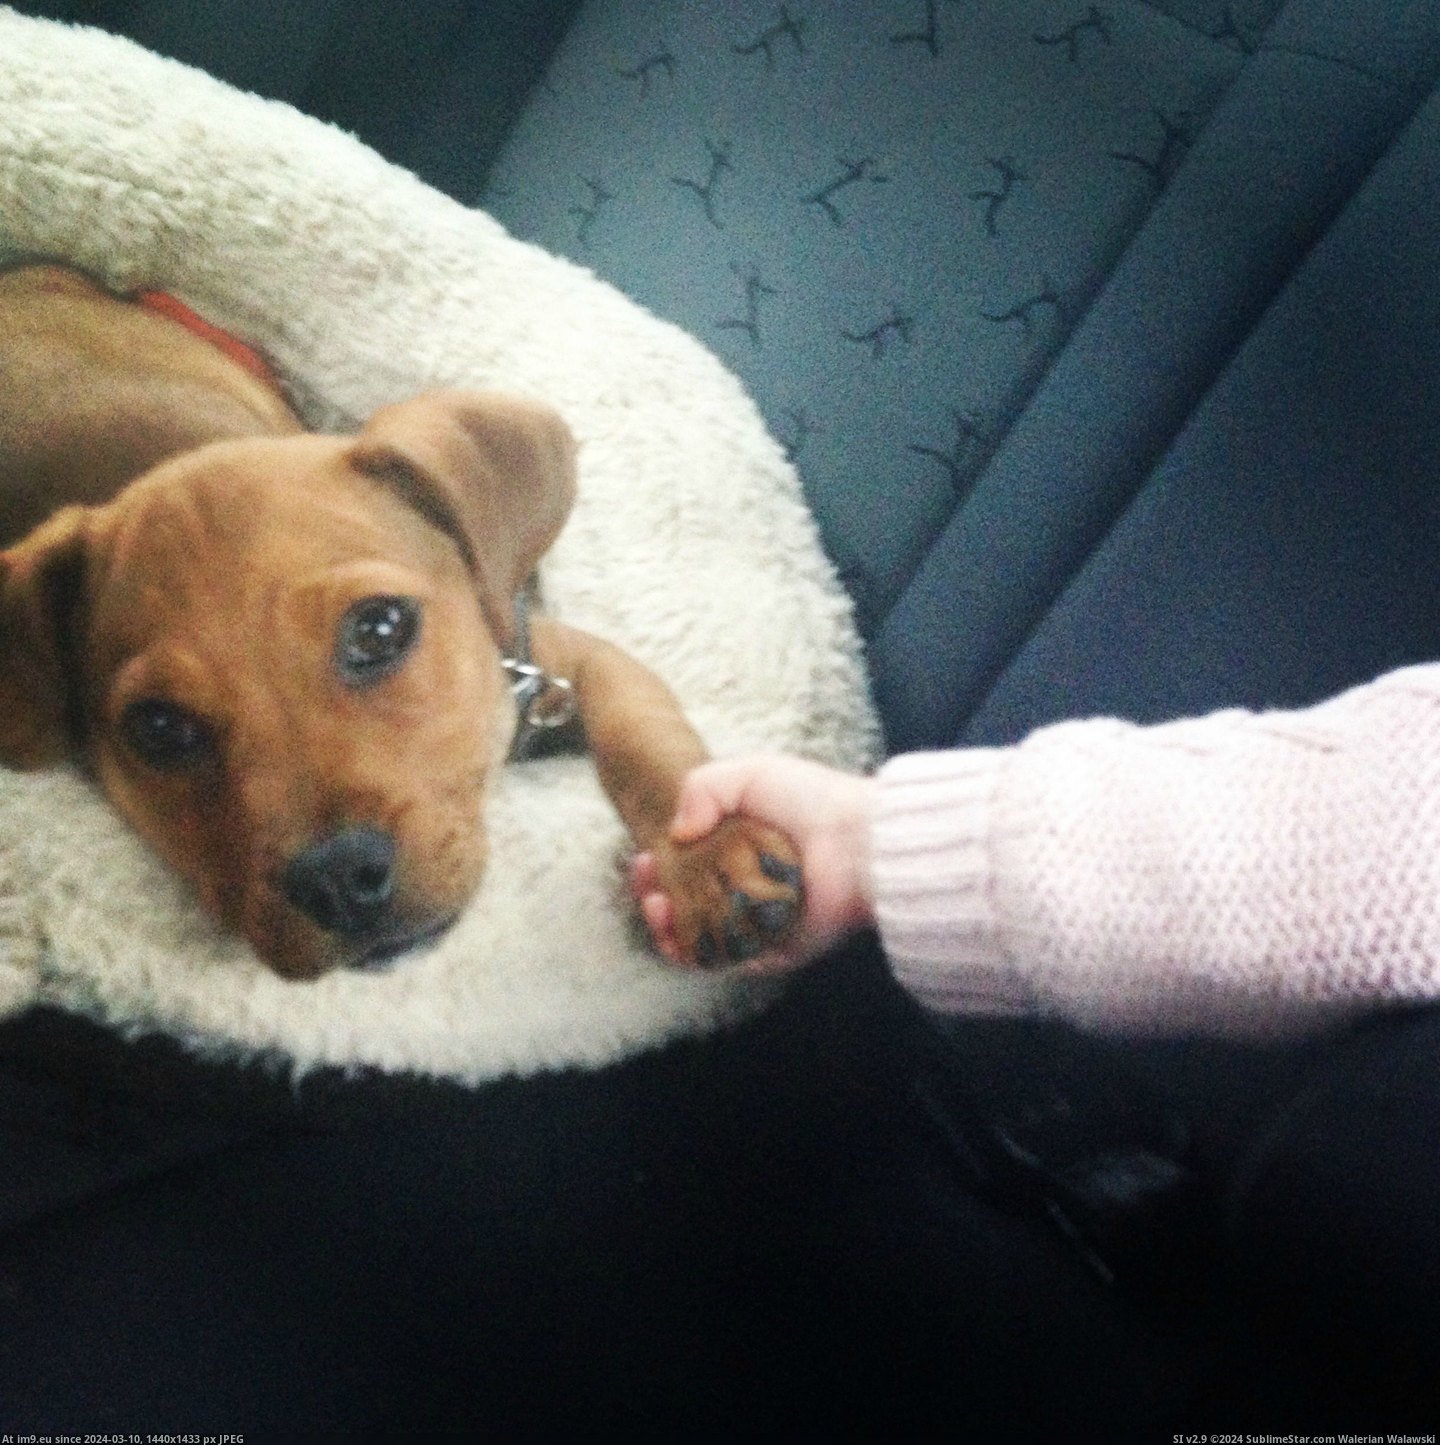 #Thought #Meet #Mad #Mollie #Puggle #Jack #Pup #Toddler [Aww] Everyone thought I was mad getting a puggle pup when I have a toddler already.... everyone meet Mollie and Jack. 11 Pic. (Изображение из альбом My r/AWW favs))